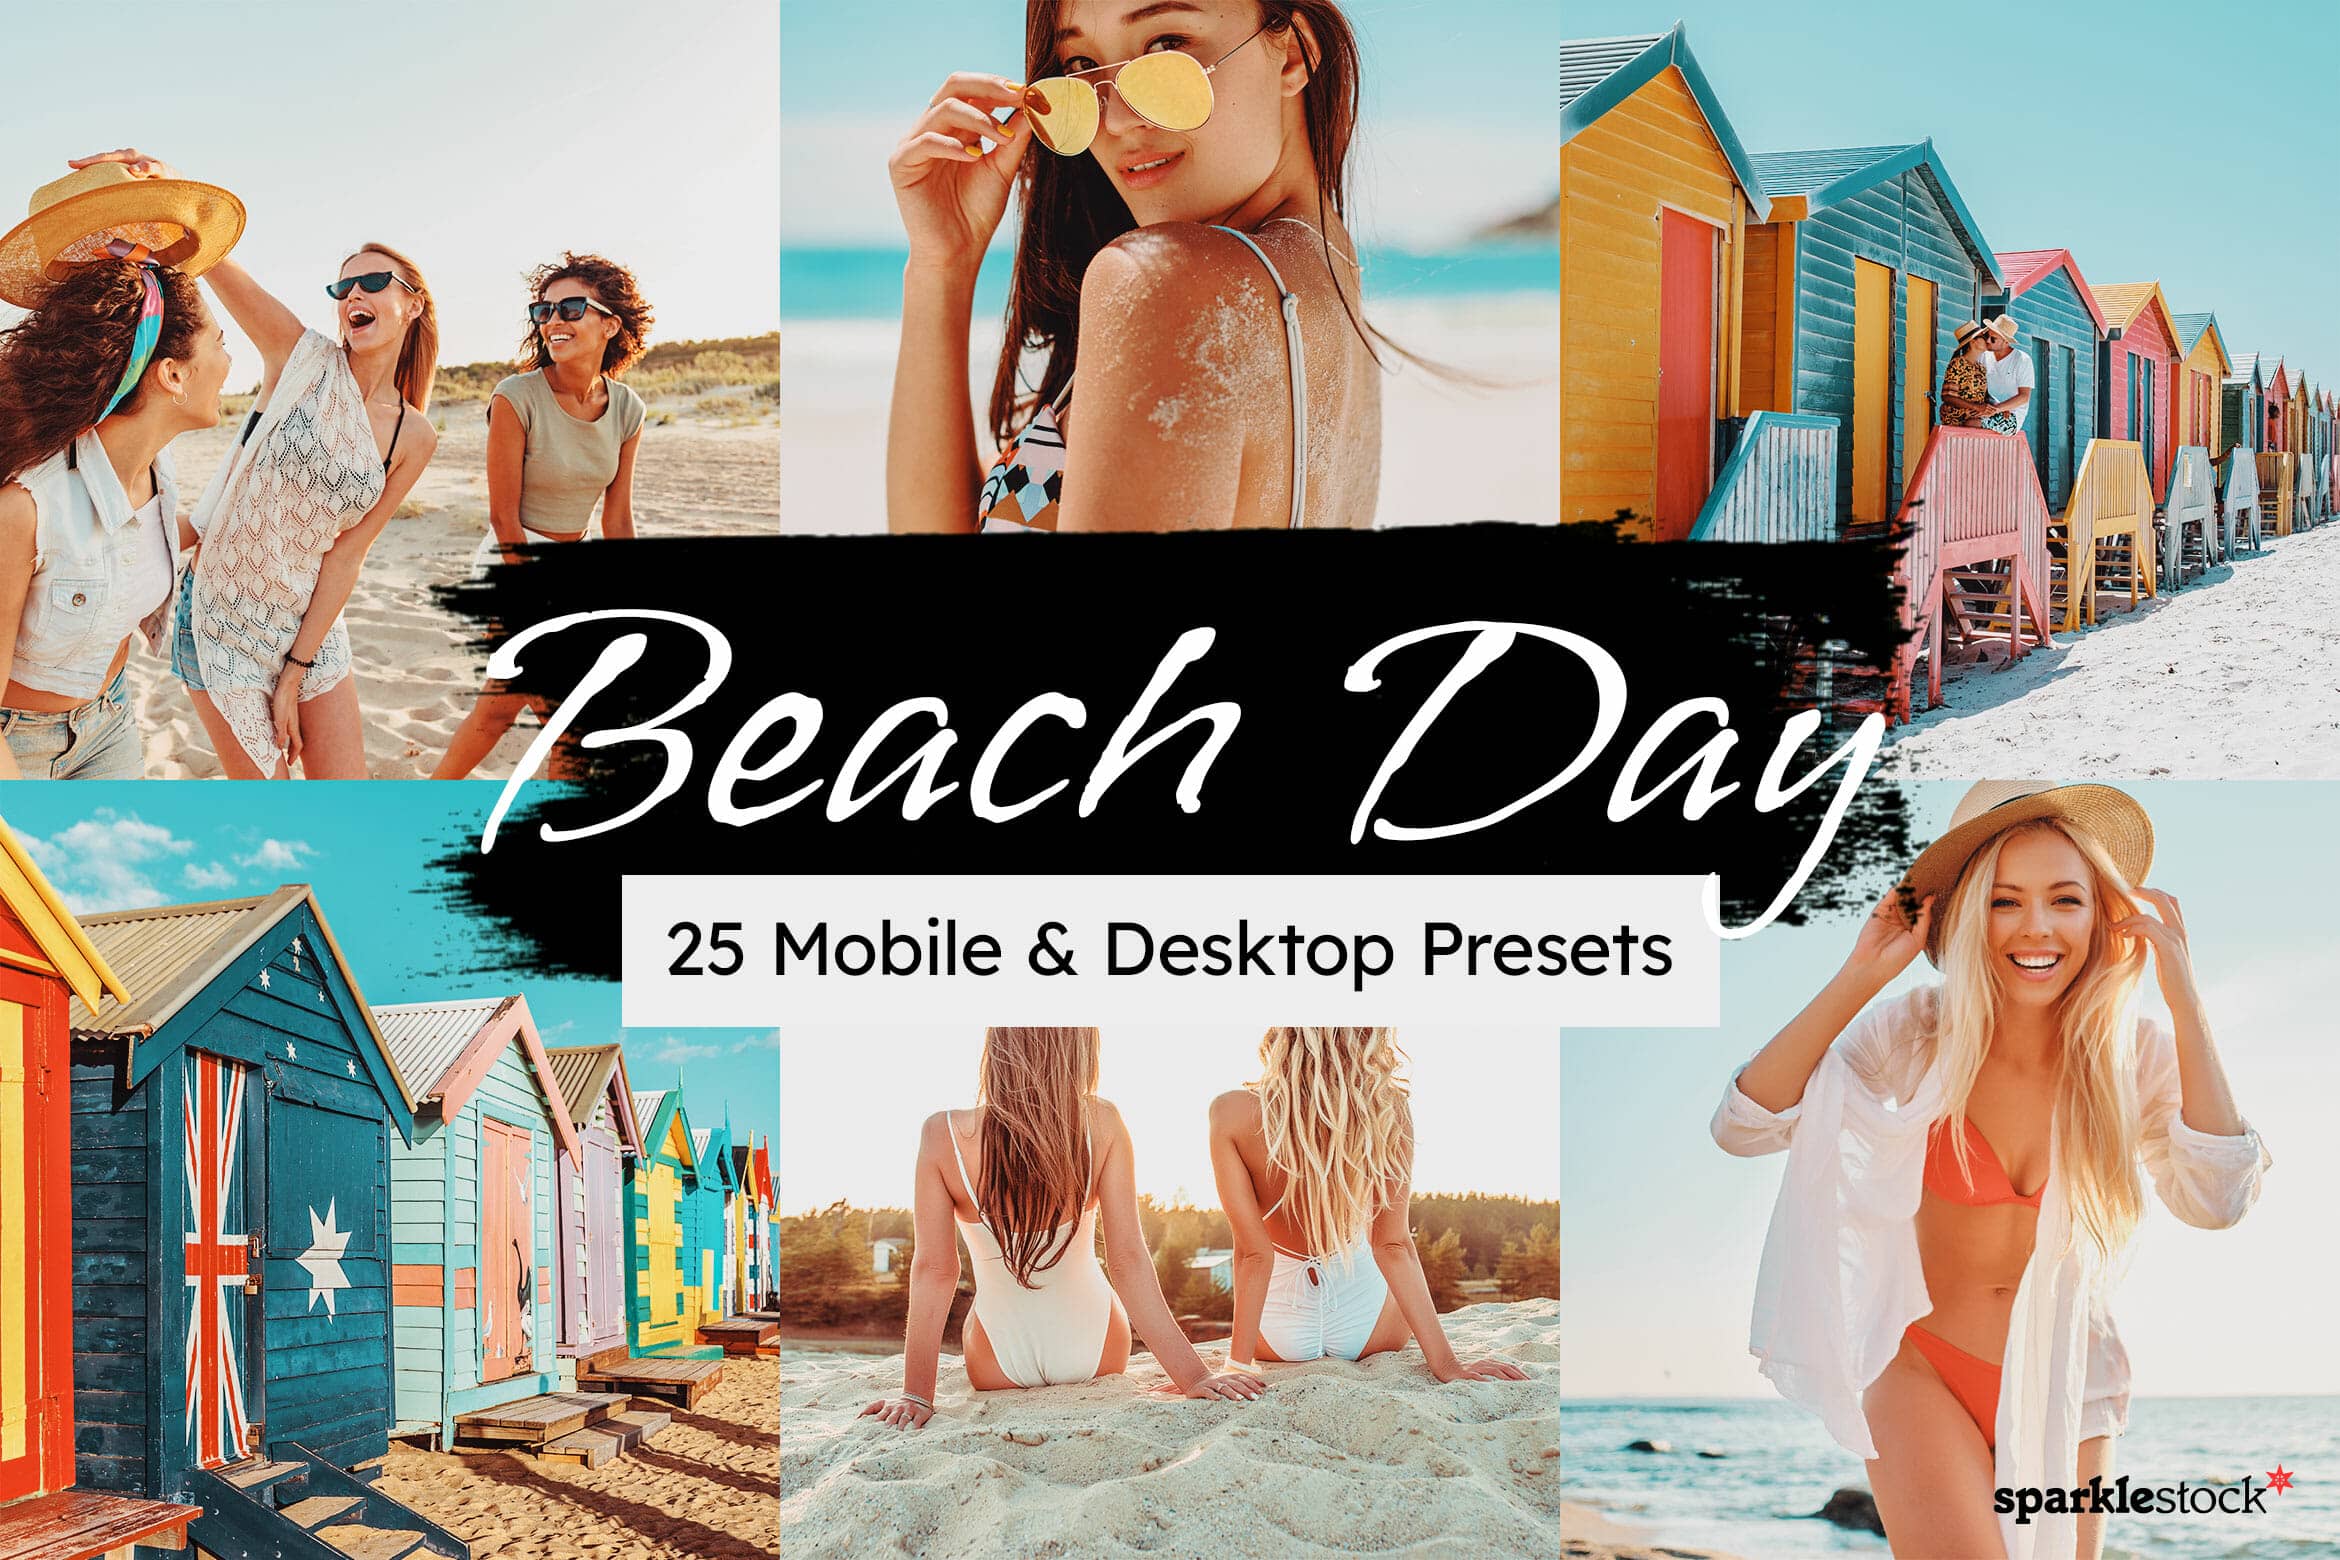 10 Free Beach Day Lightroom Presets and LUTs